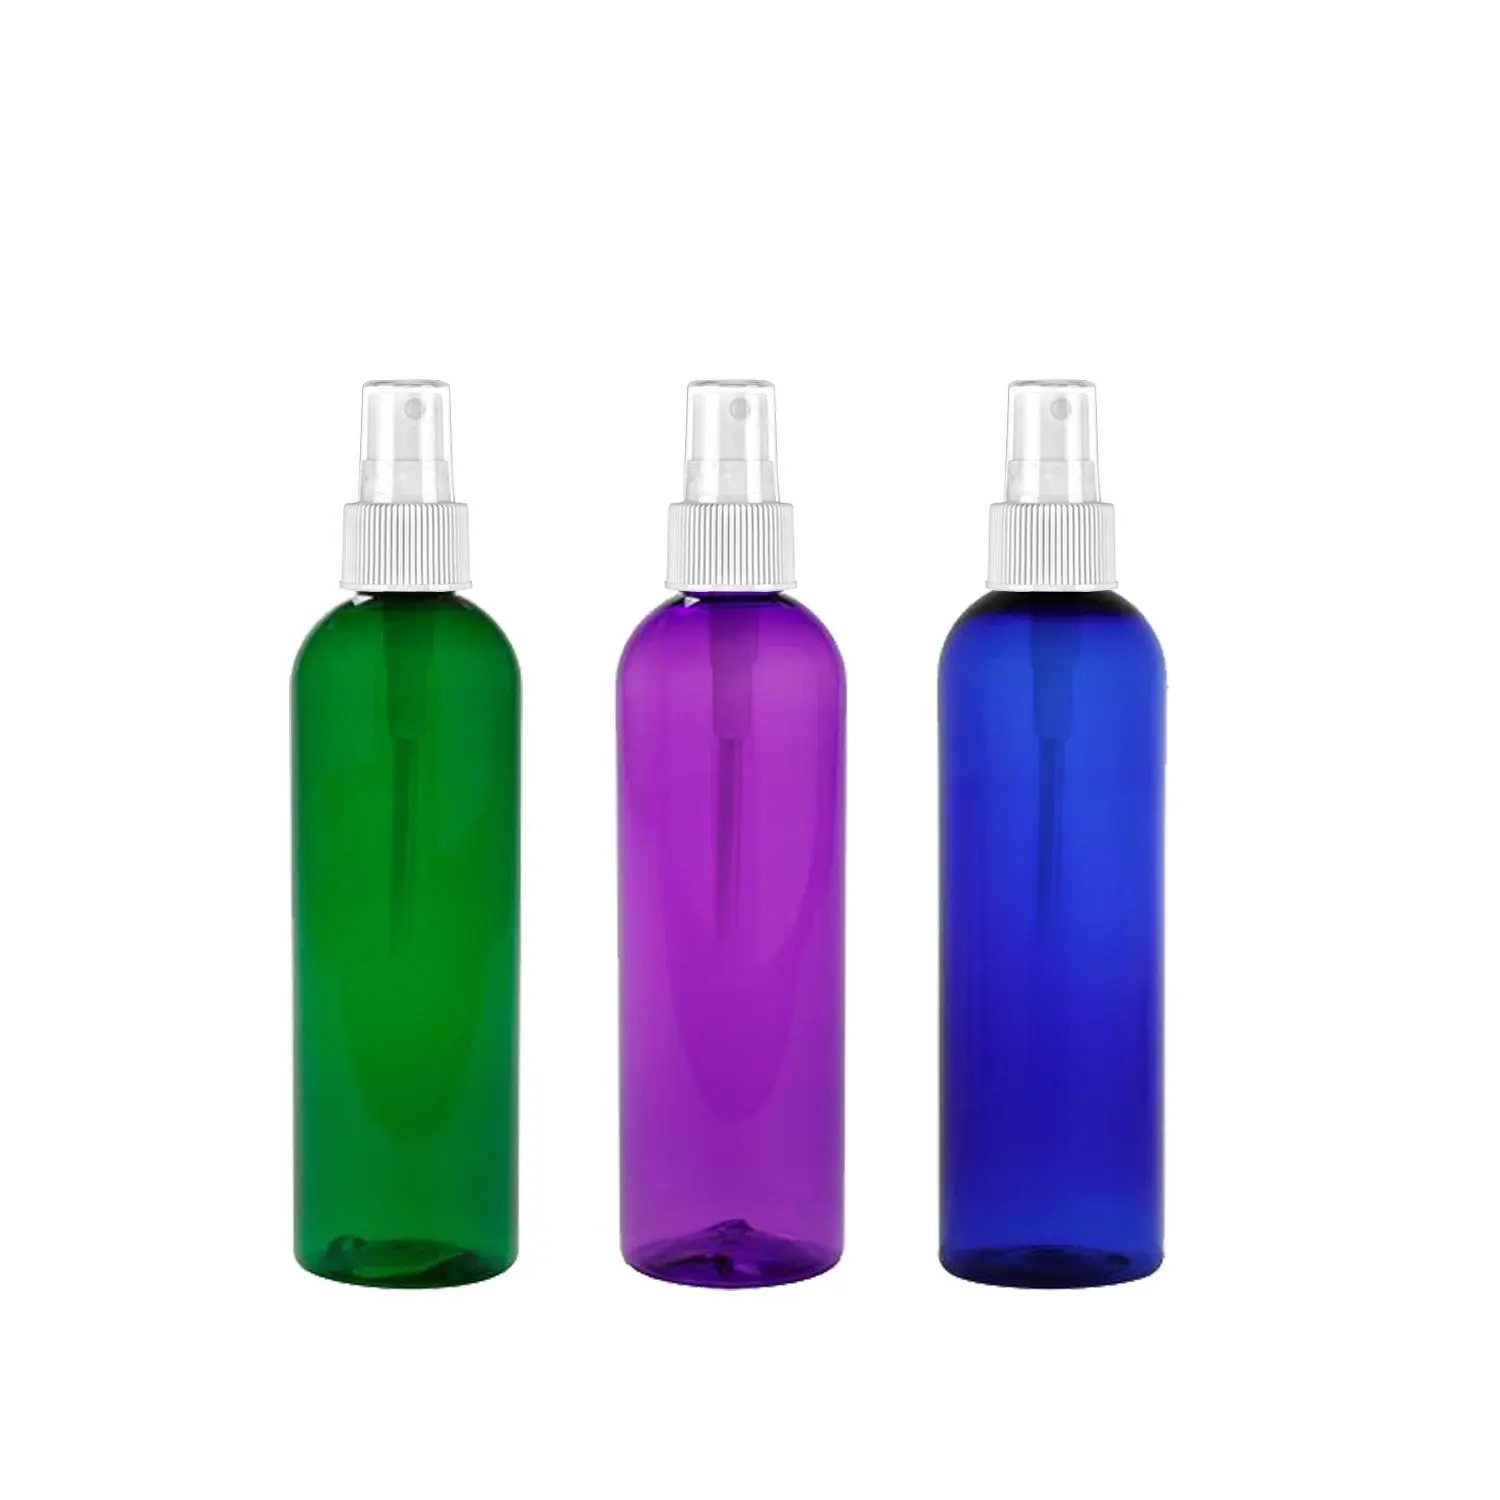 Buy MoYo Natural Labs 4 oz Spray Bottles Fine Mist Empty Travel Containers, BPA Free PET Plastic